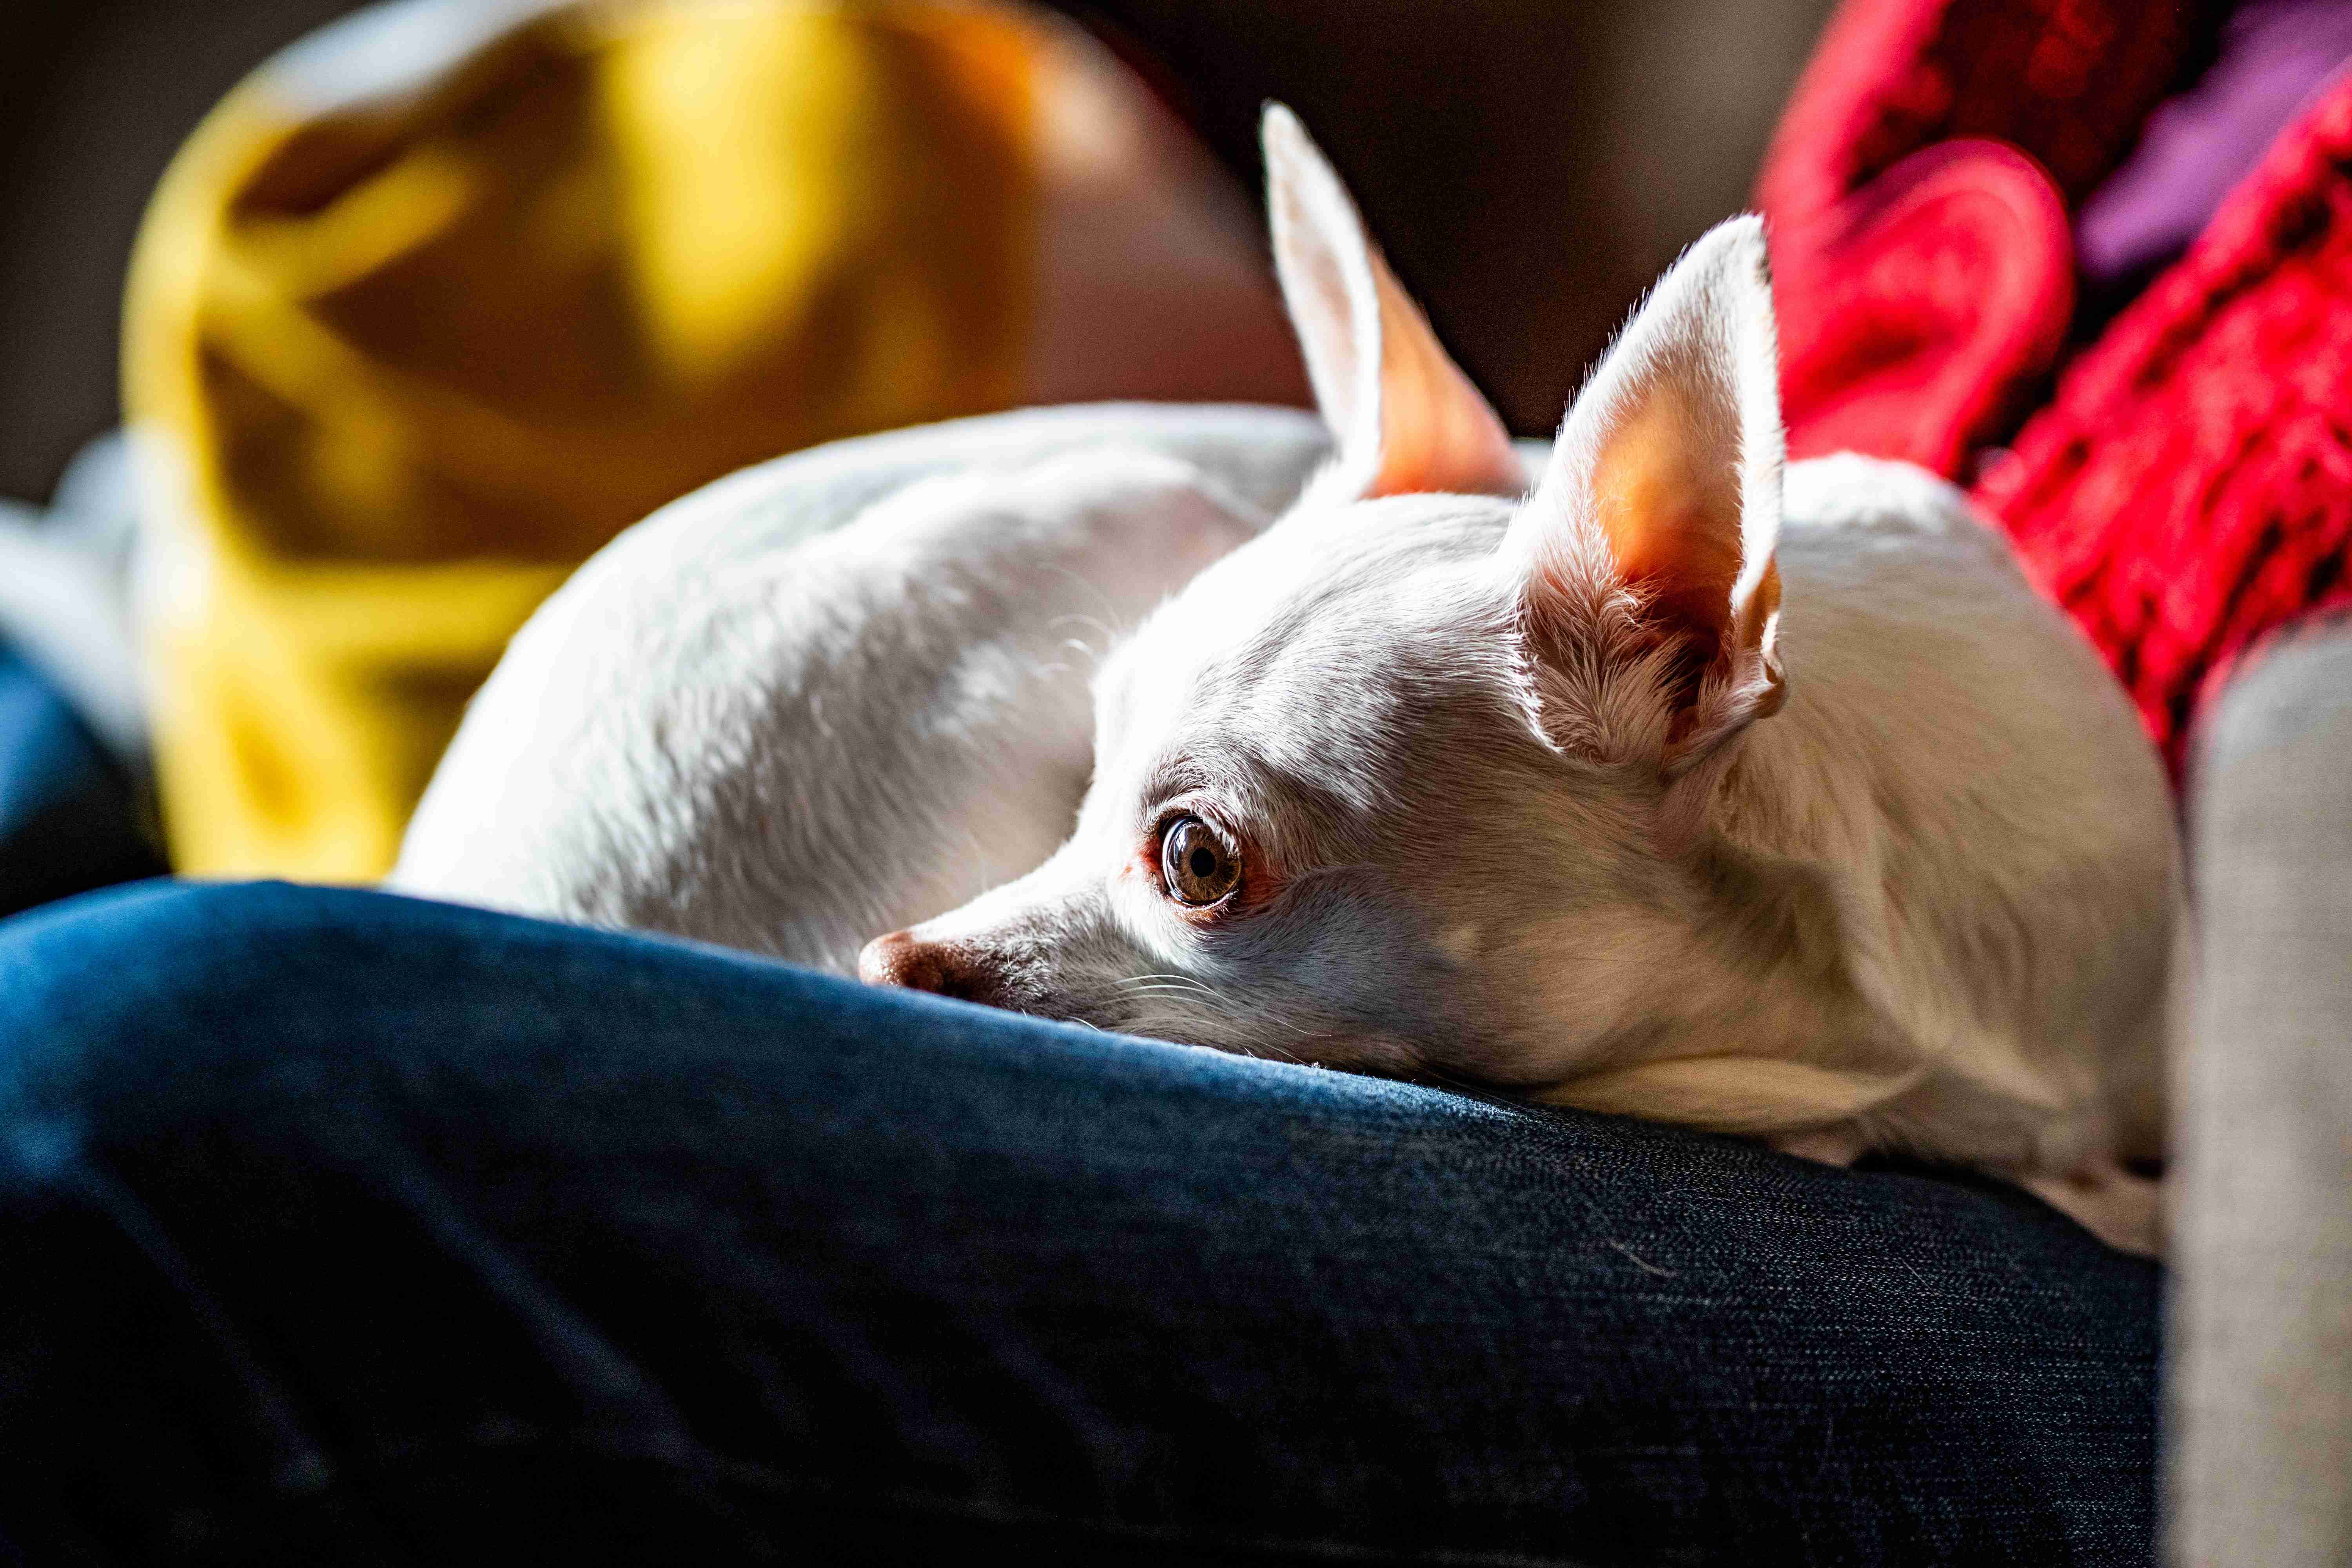 Can Chihuahuas become aggressive towards strangers in public places?